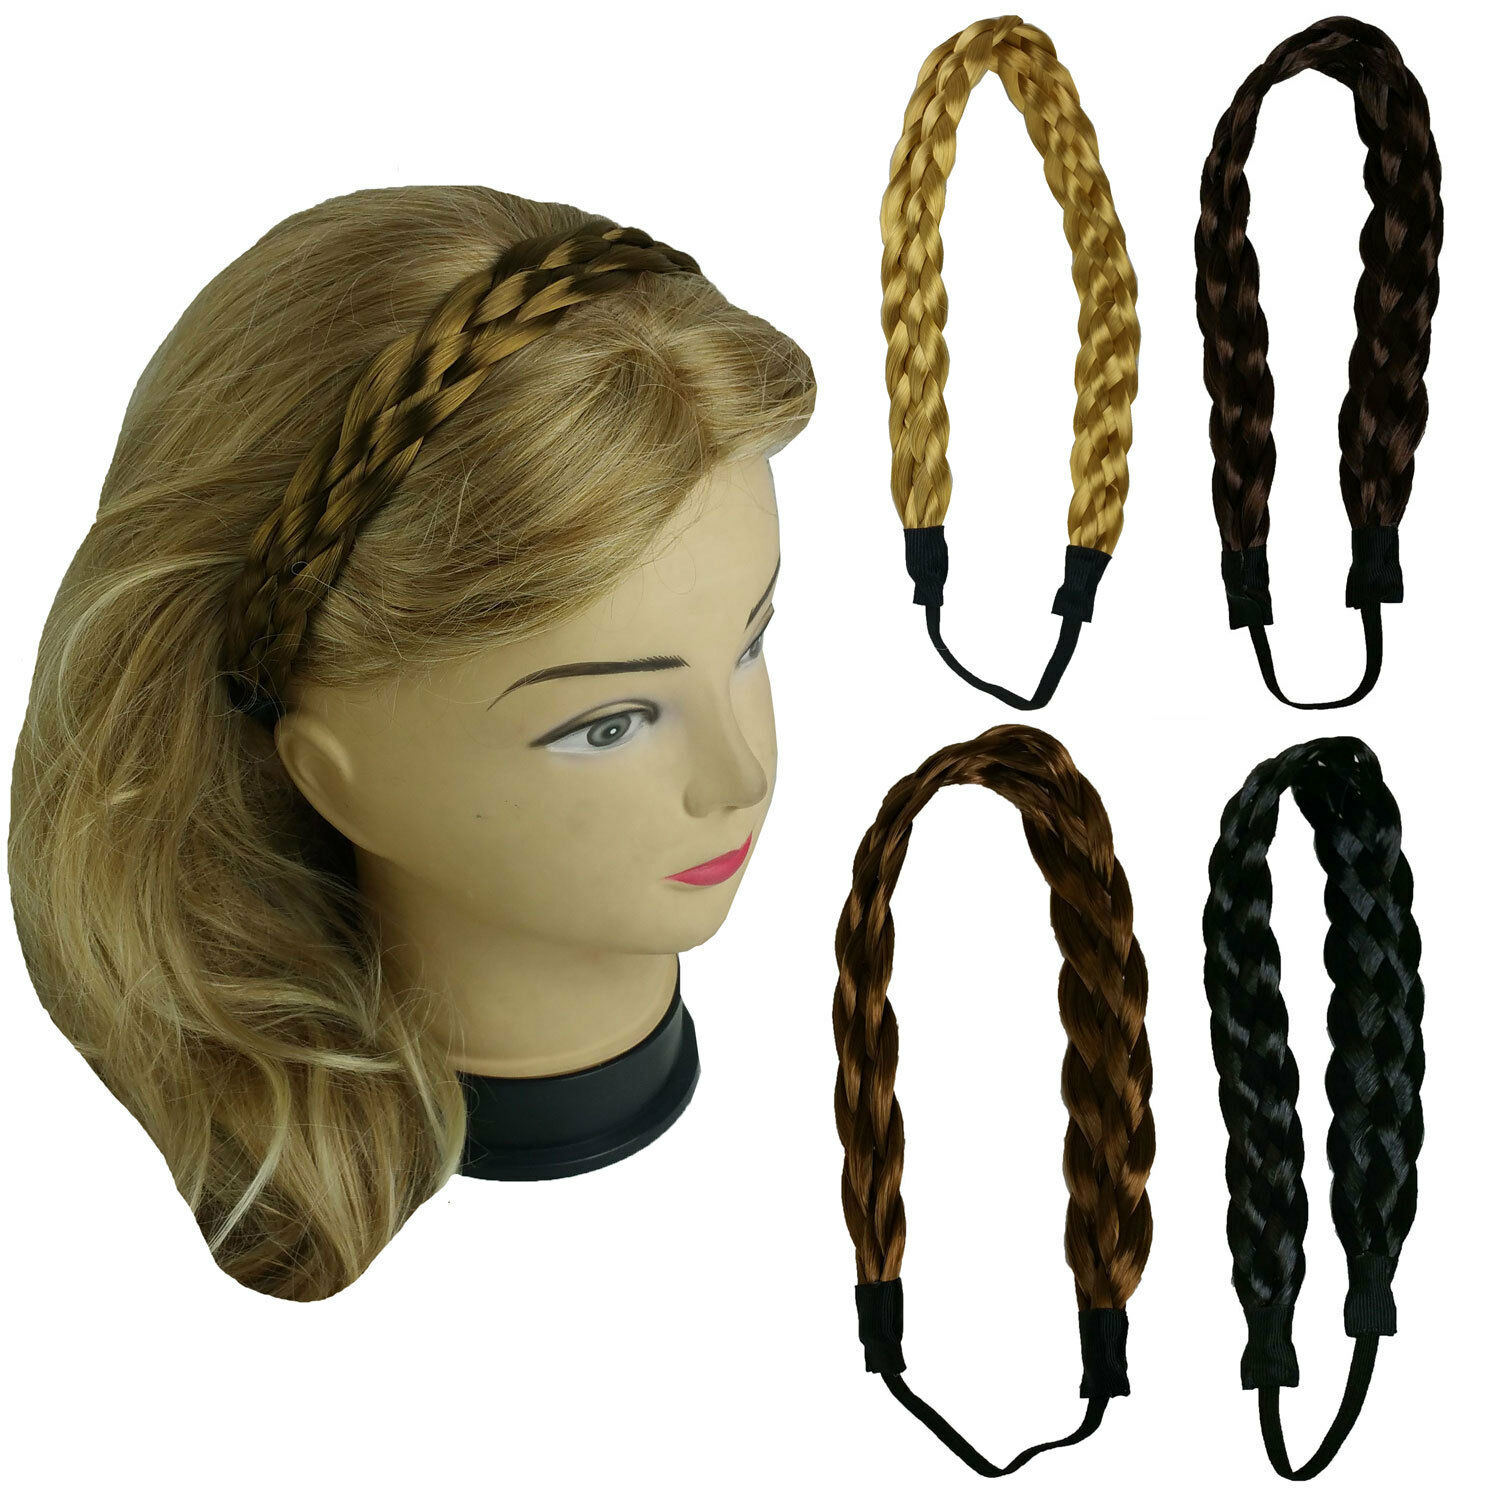 Synthetic Hair Band Plaited Headband Braided With Elastic 3/4"~1" Wide